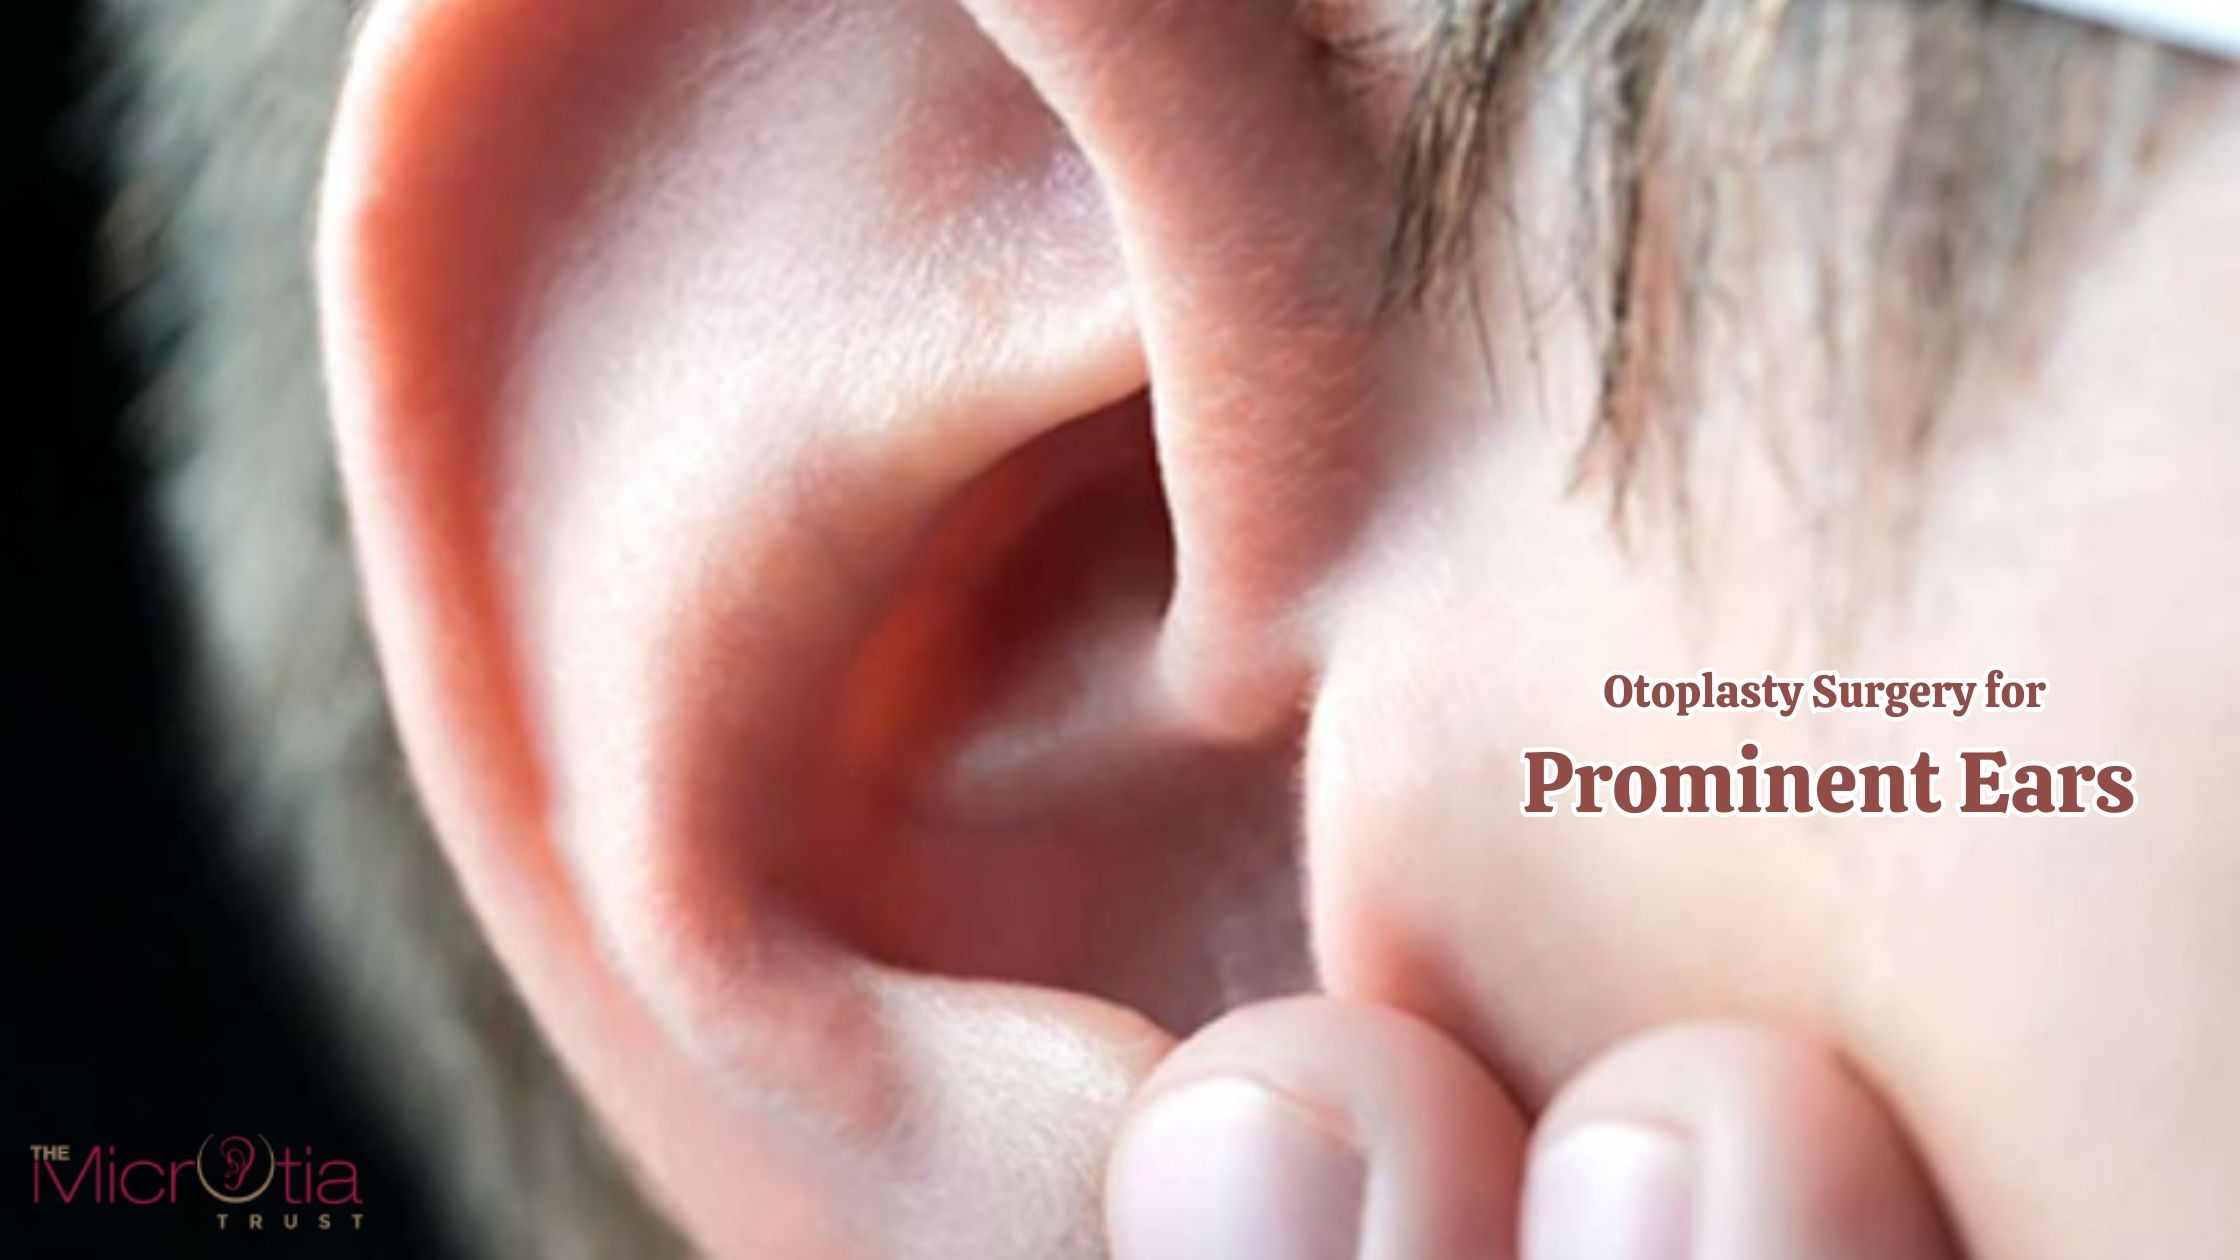 Otoplasty Surgery for Prominent Ears